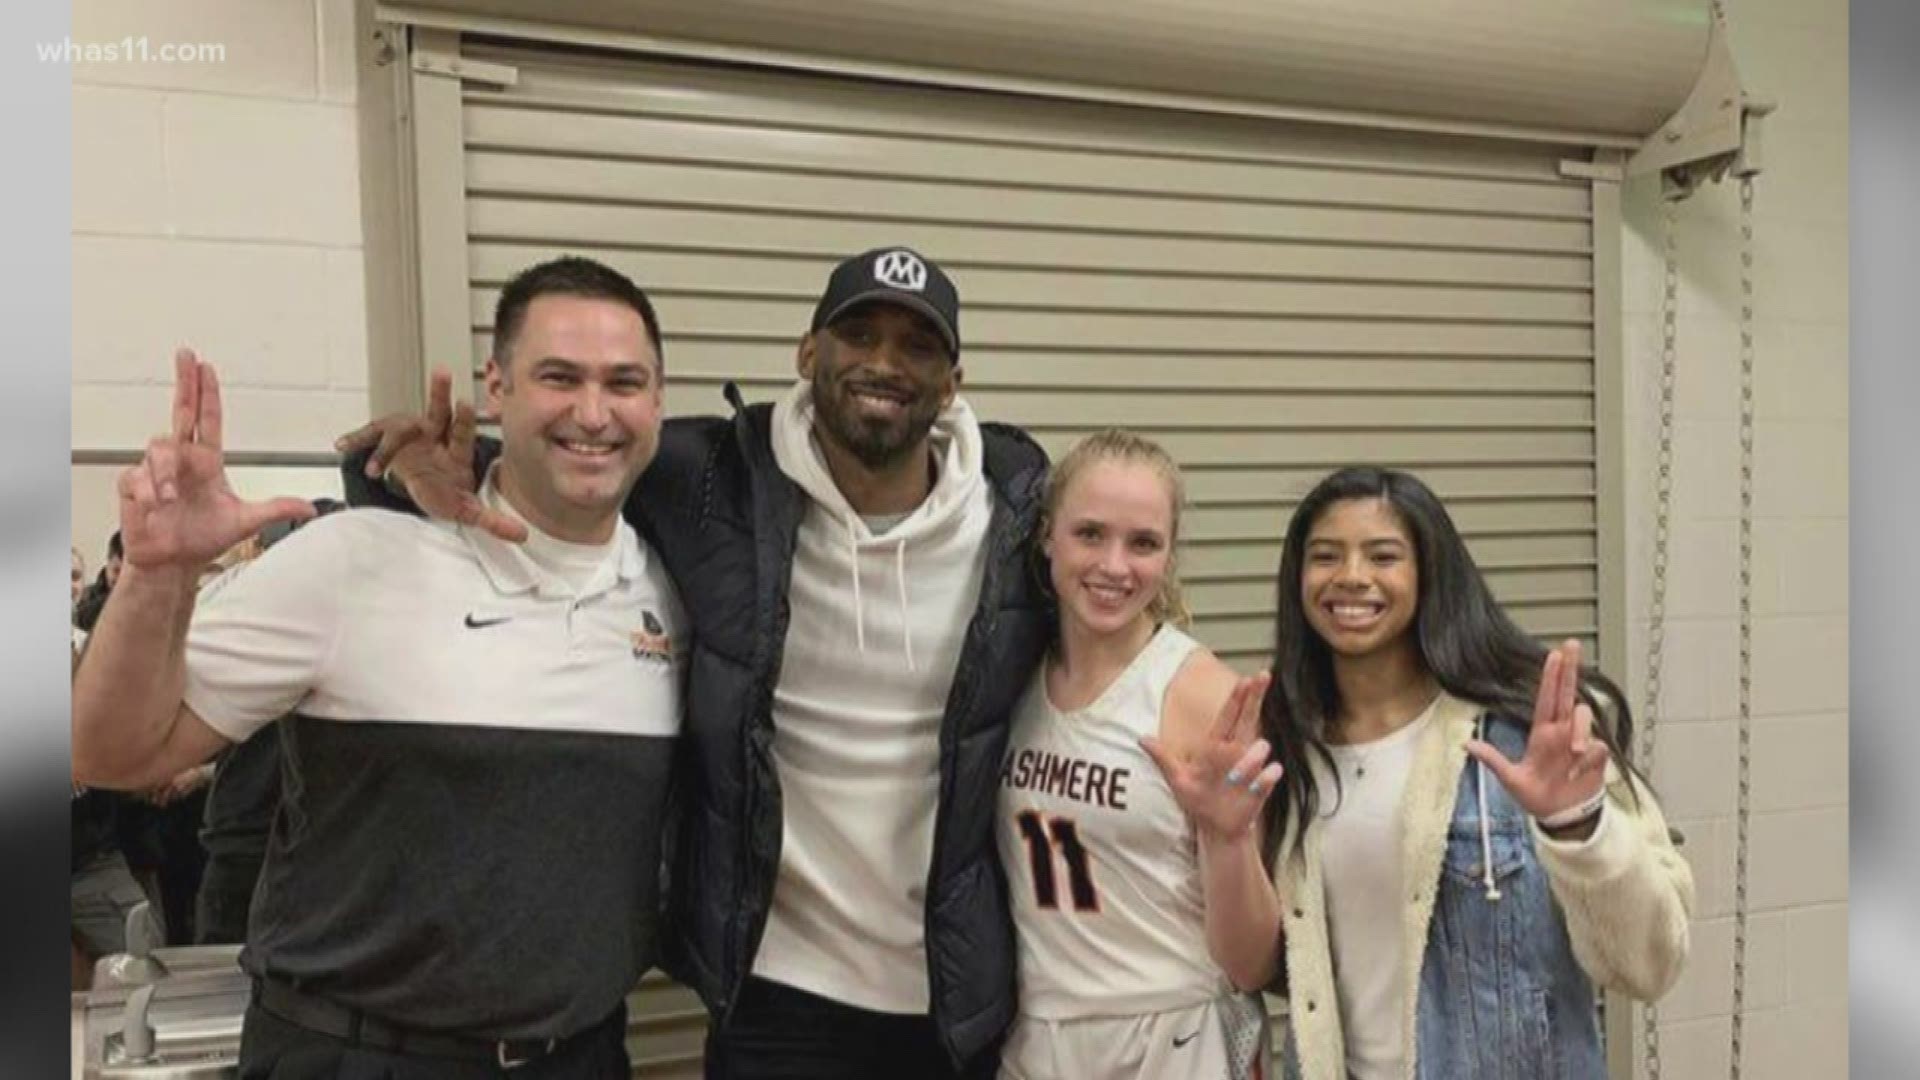 Kobe and Gigi Bryant traveled to Washington to watch Van Lith play, throwing L's up with her after the game.